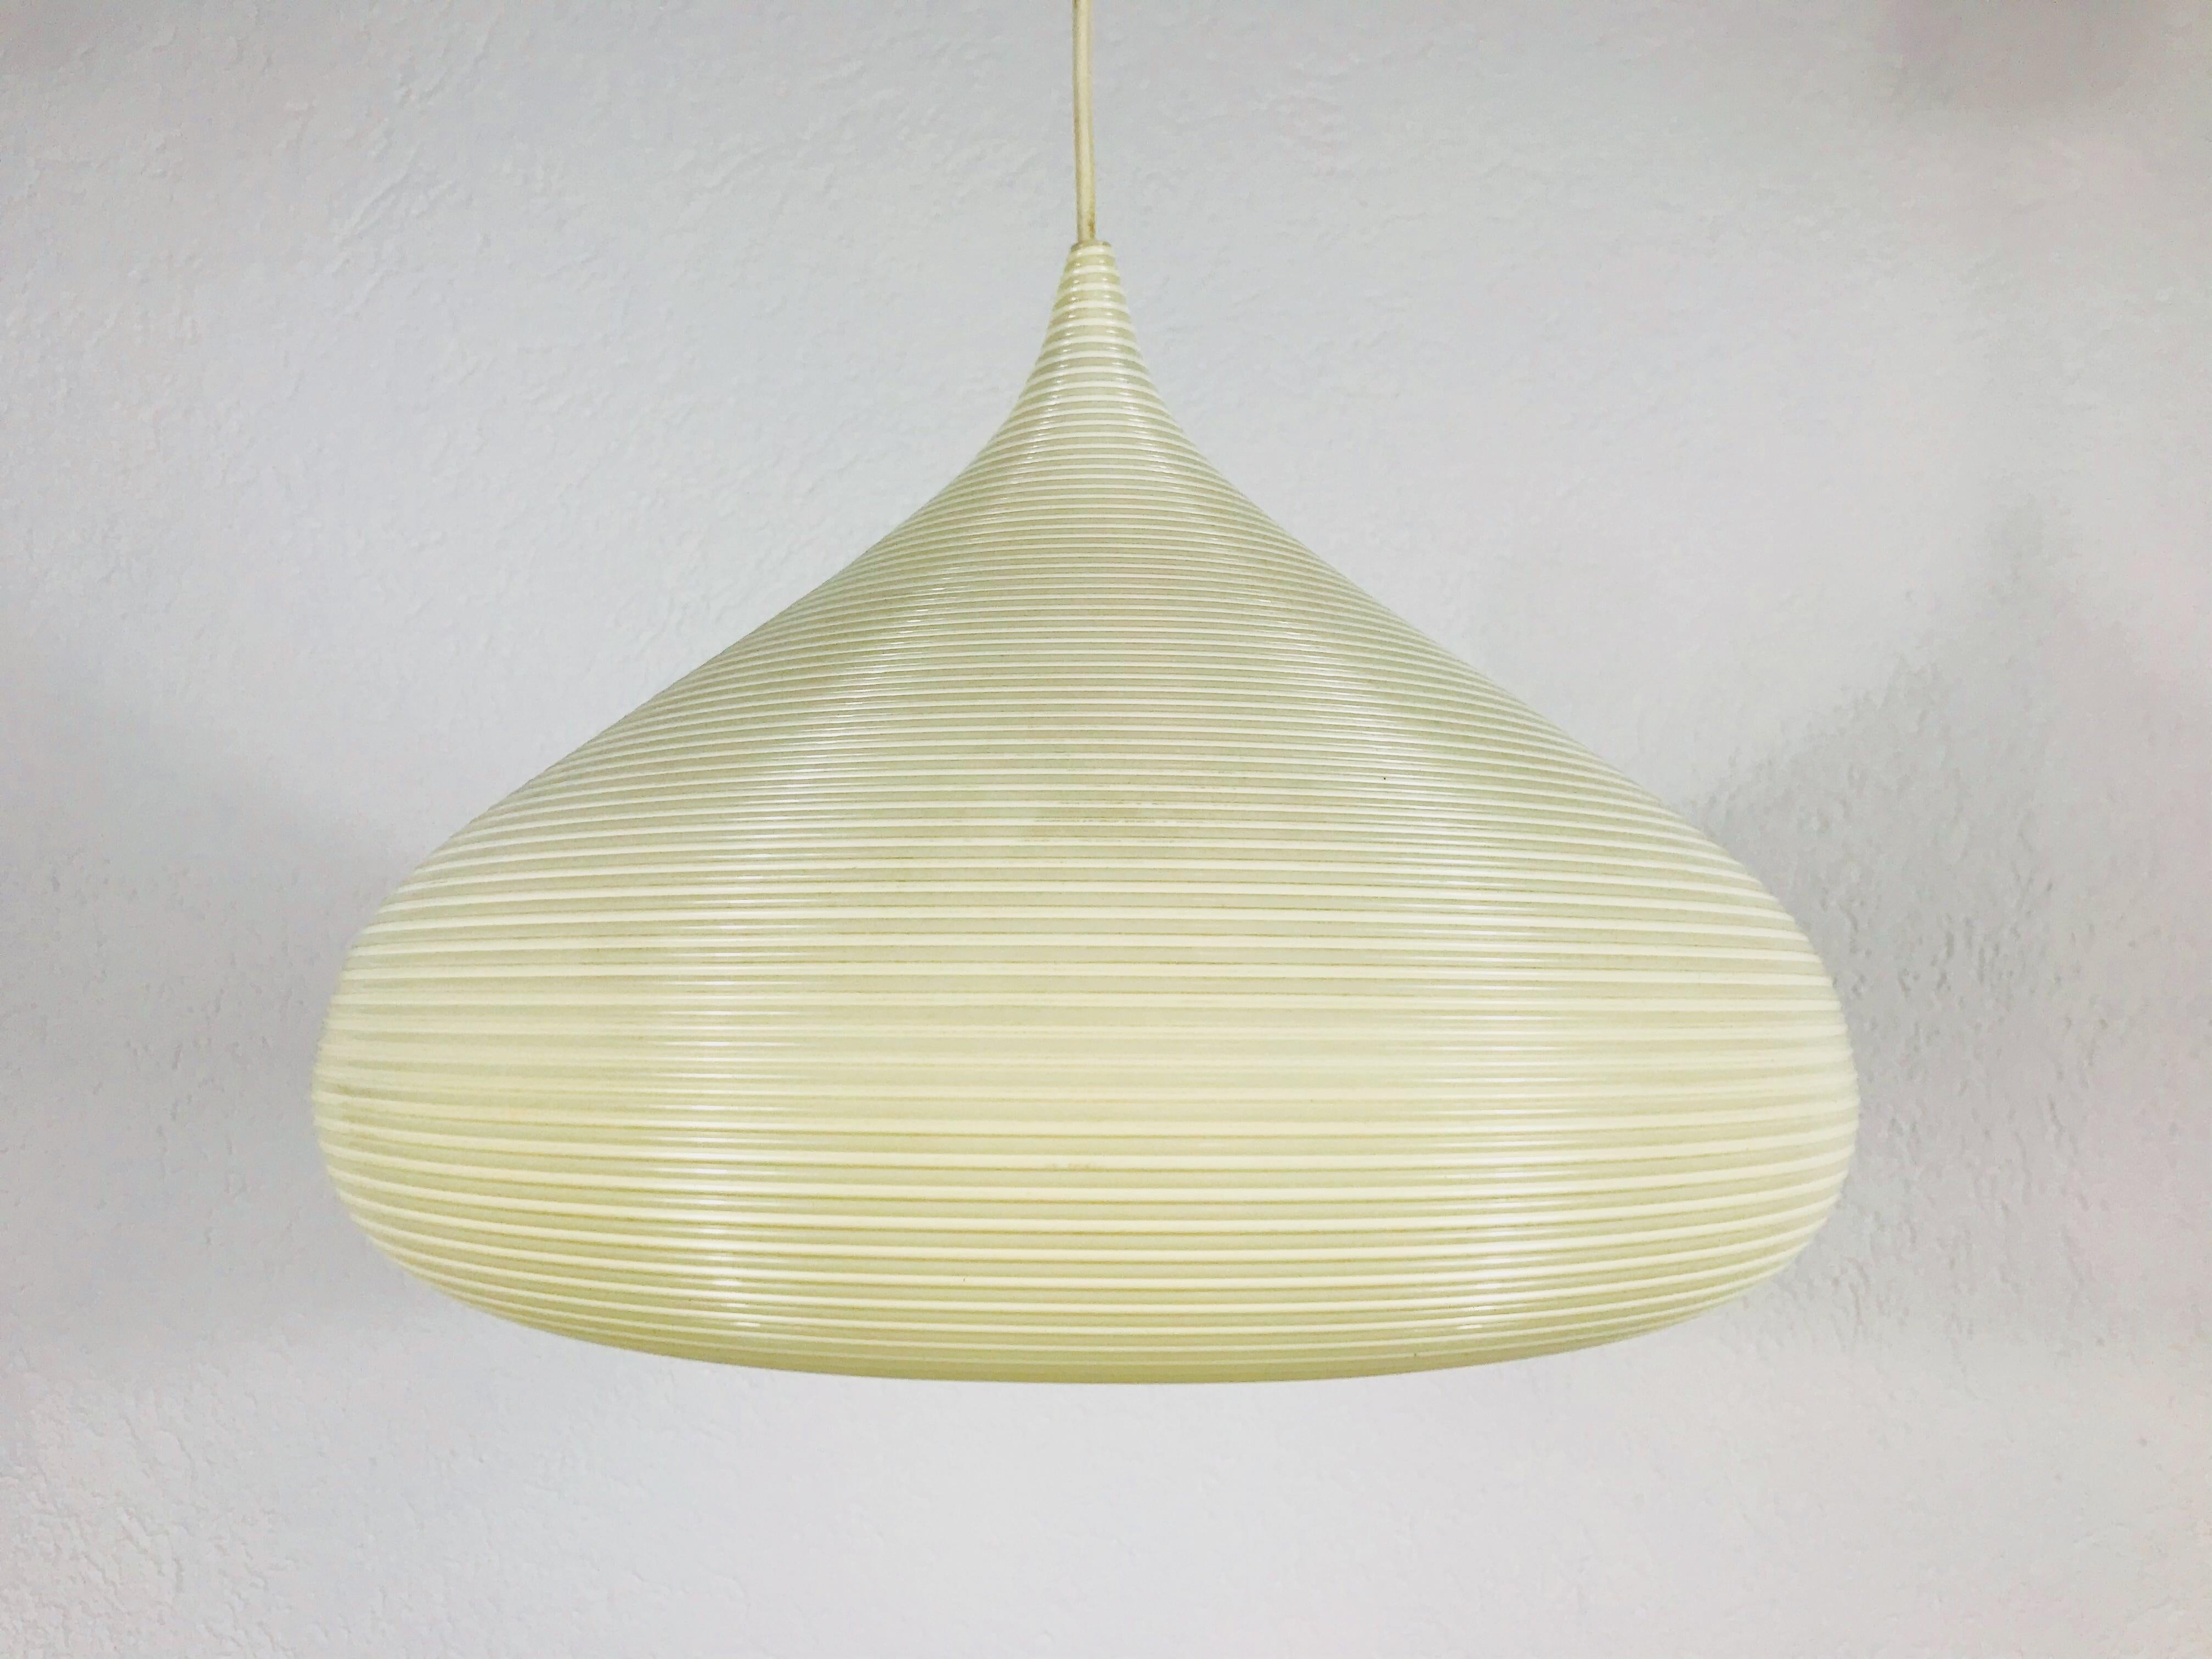 Mid-Century Modern Rotaflex pendant lamp made in the 1960s. The lamp shade is made of continuous plastic cords spun into a ceiling fixture. The top of the lamp is hard plastic. The lamp is in good vintage condition.

Measure: Maximum height of the